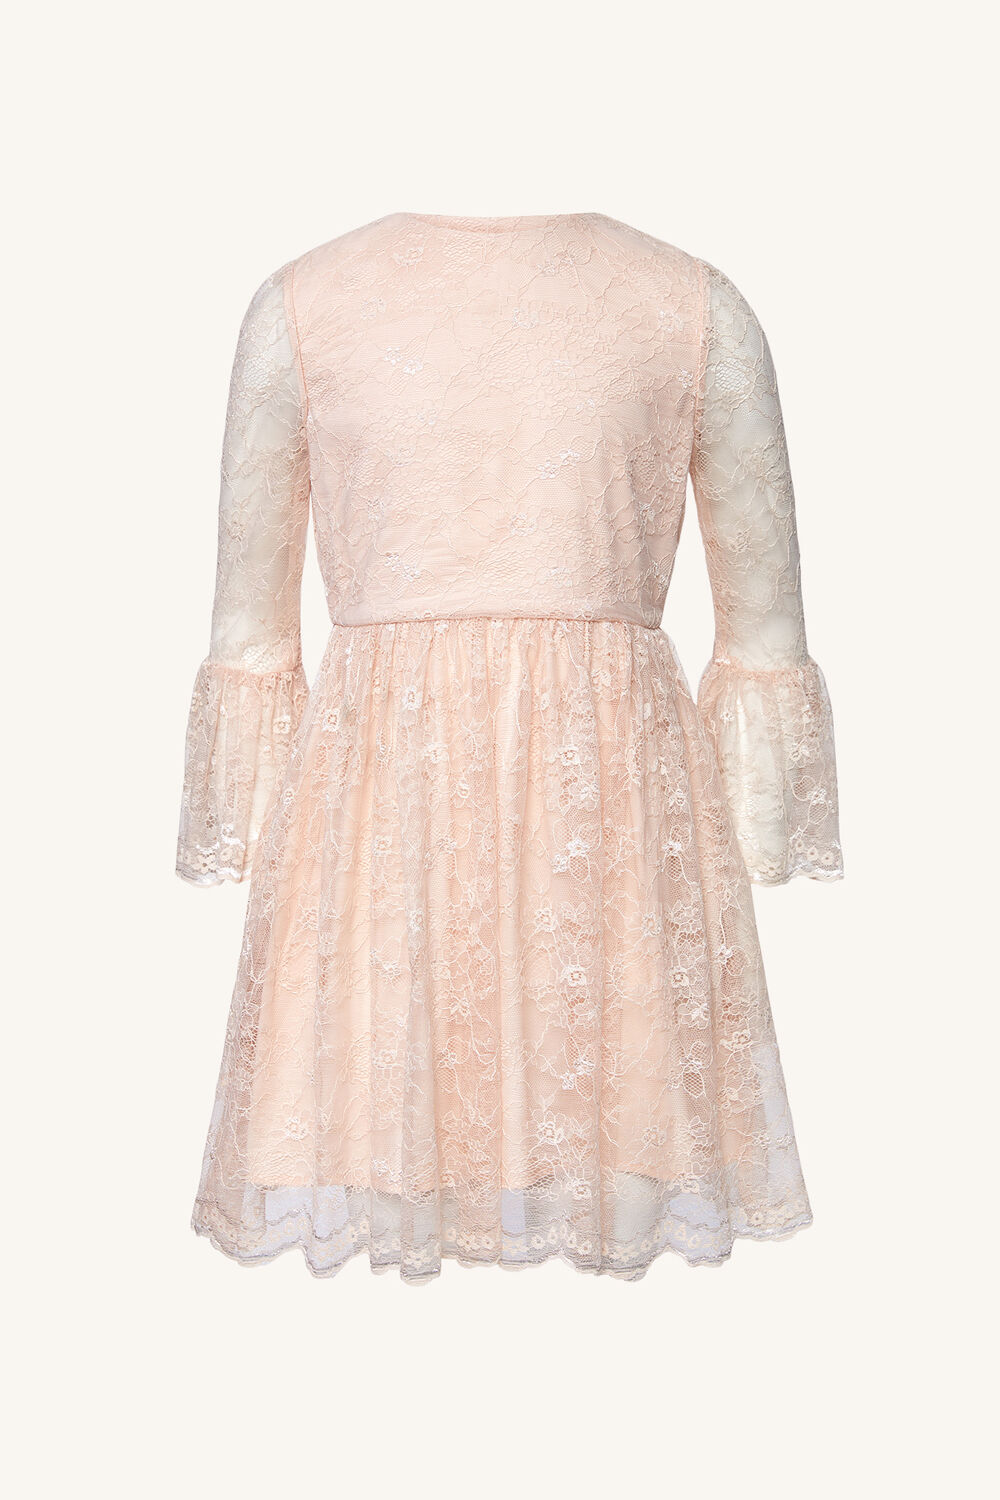 Girls  LIANNI LACE DRESS in colour SOFT PINK